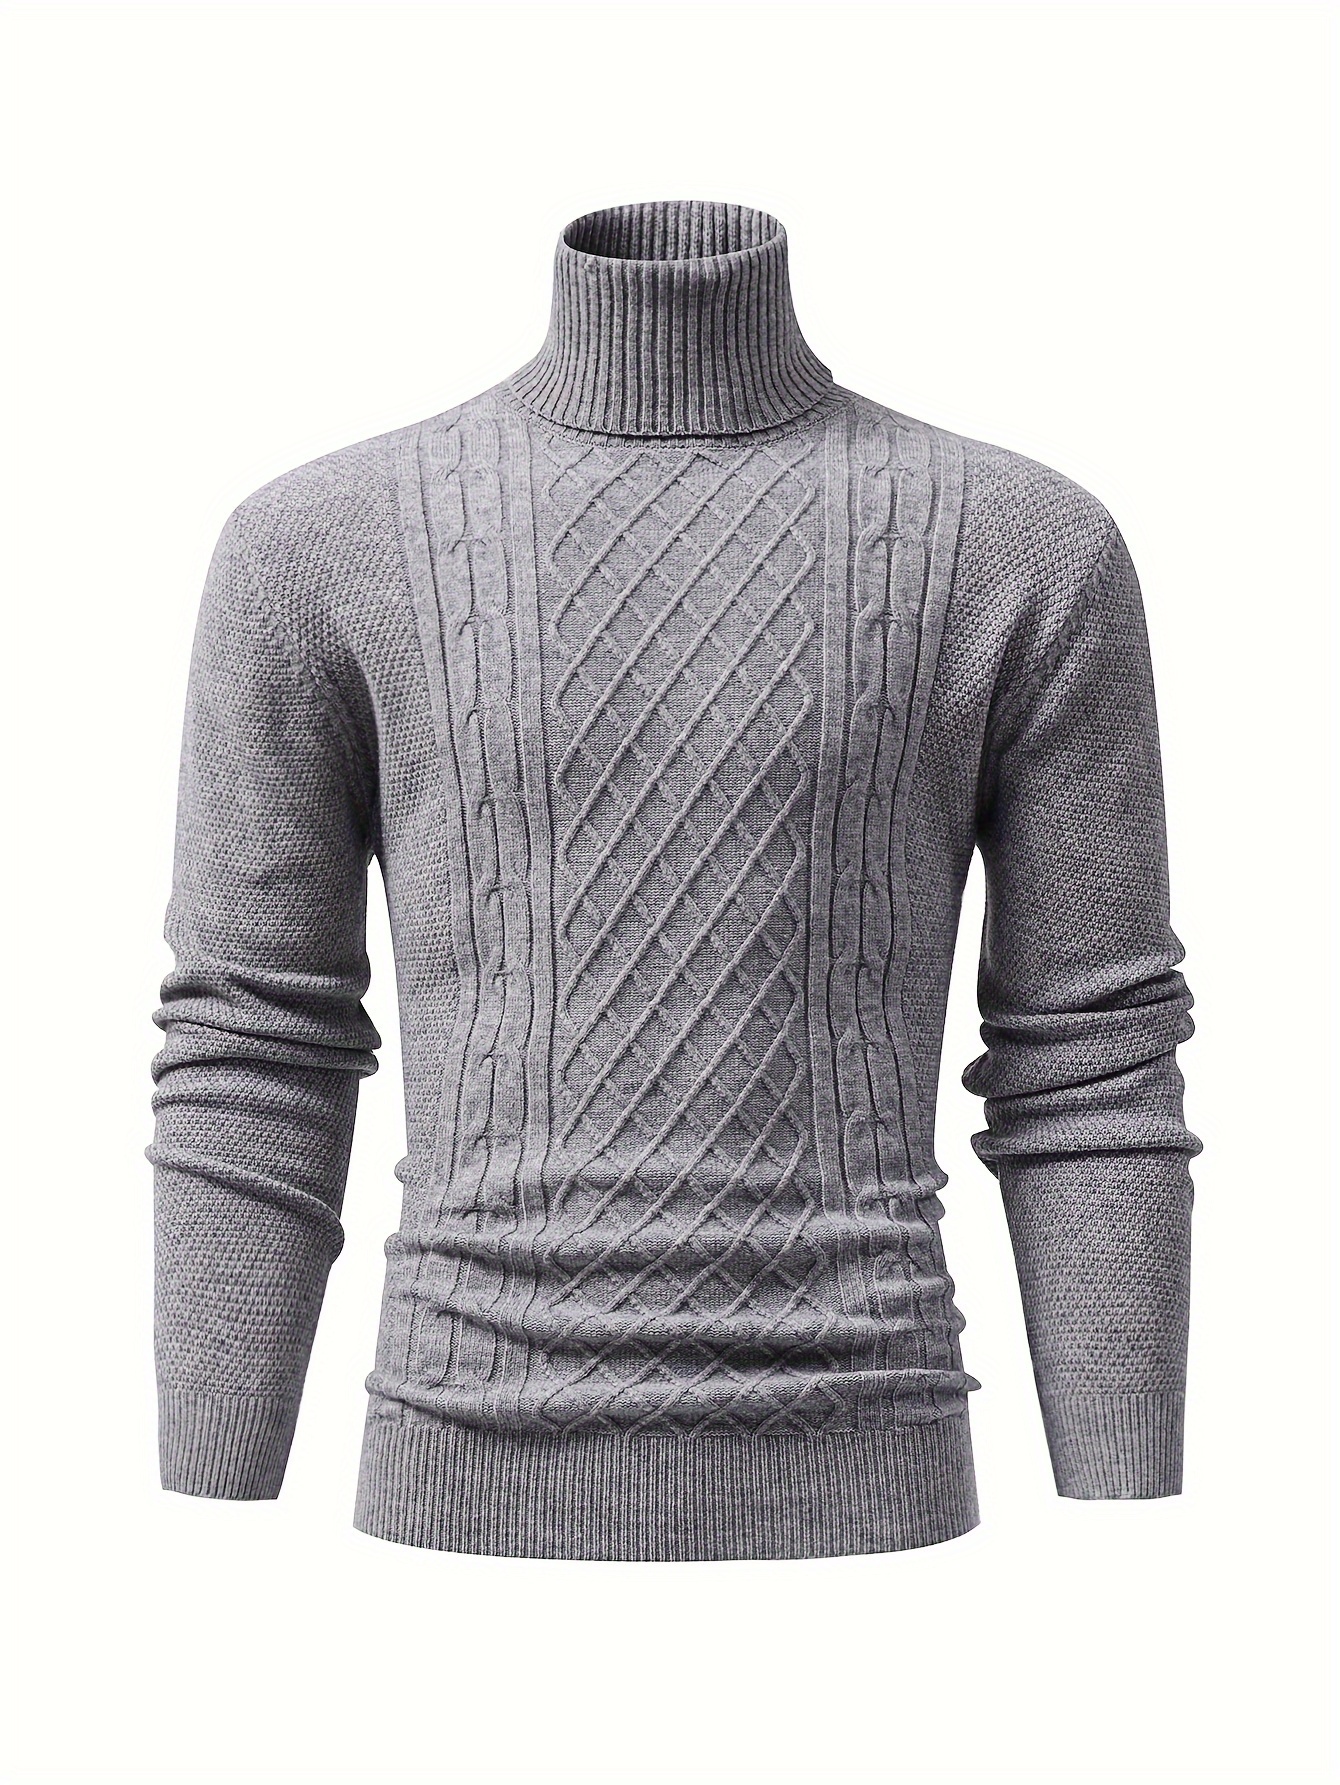 Men Winter Warm Roll Turtle Neck Pullover Top Sweater Thick Cable